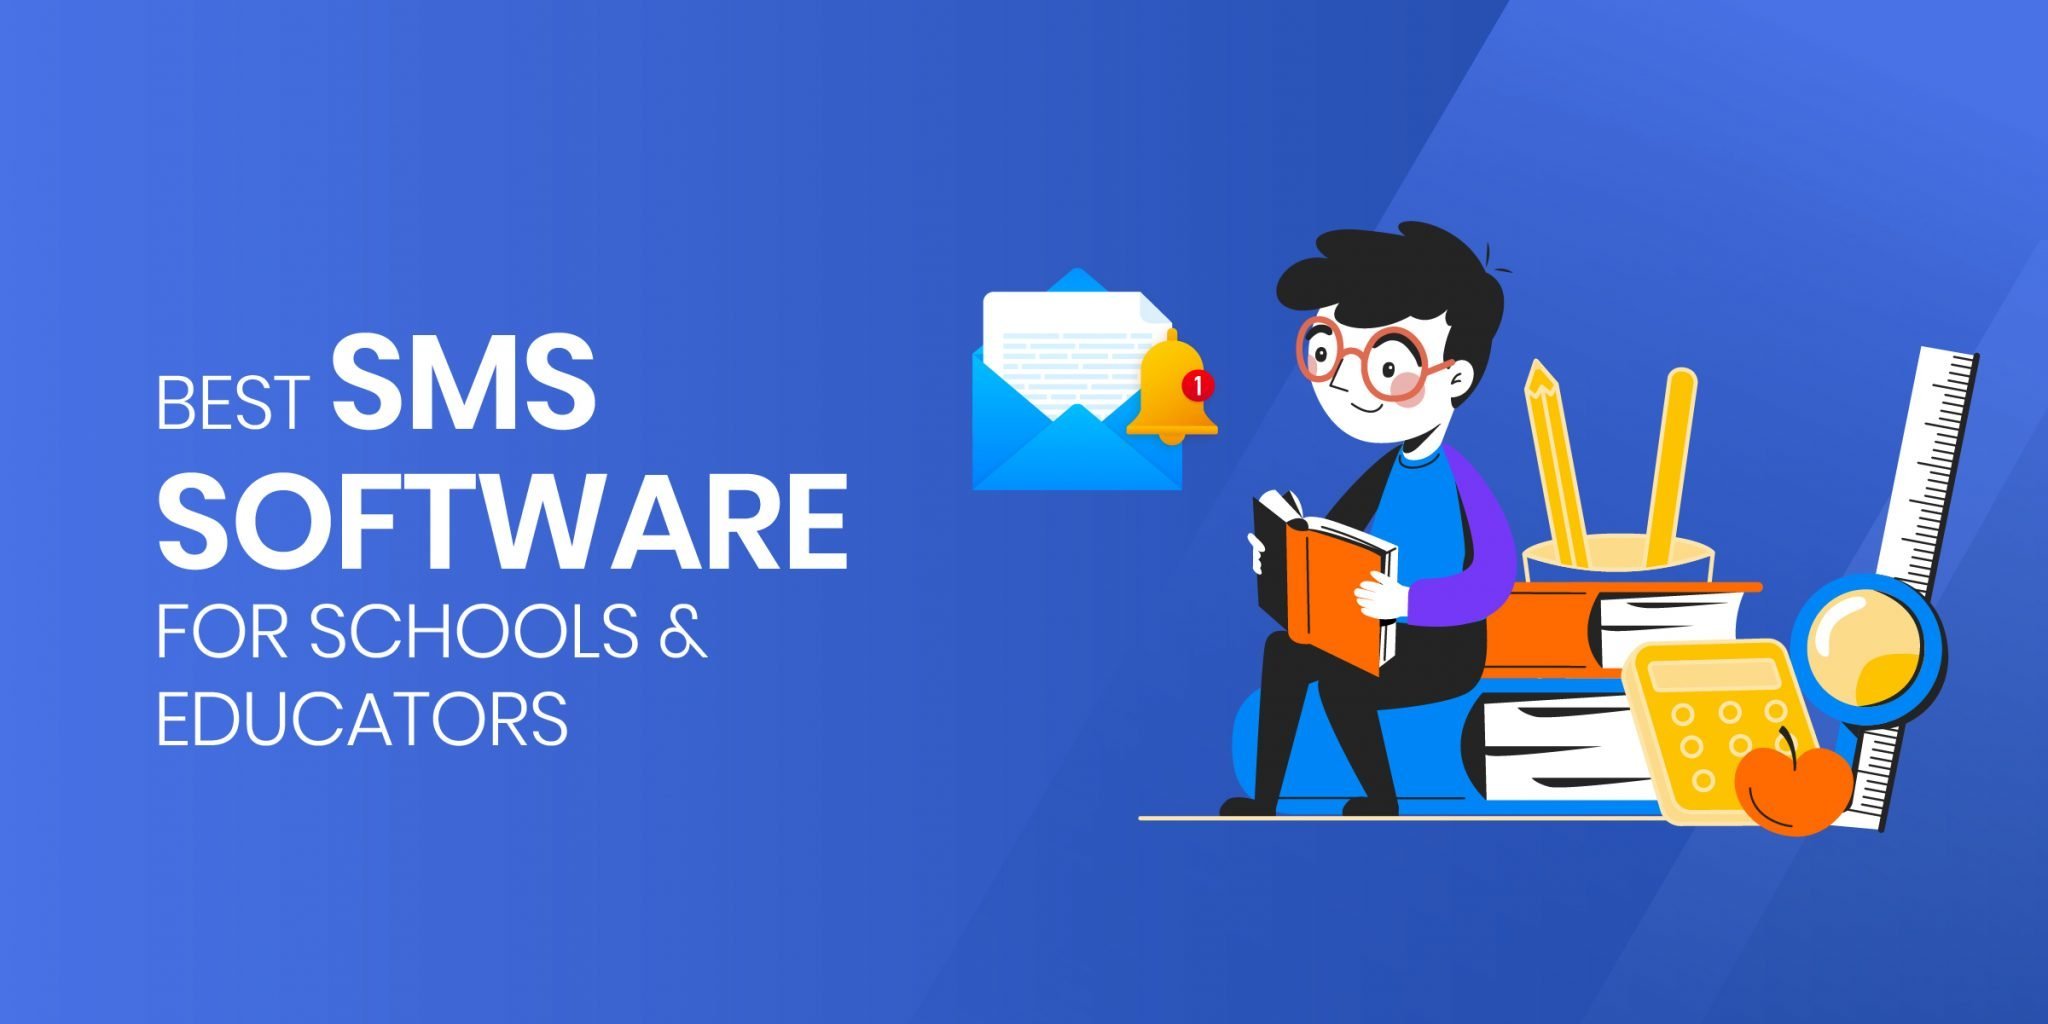 10 Best SMS Software for Schools & Educators [2022 Edition]